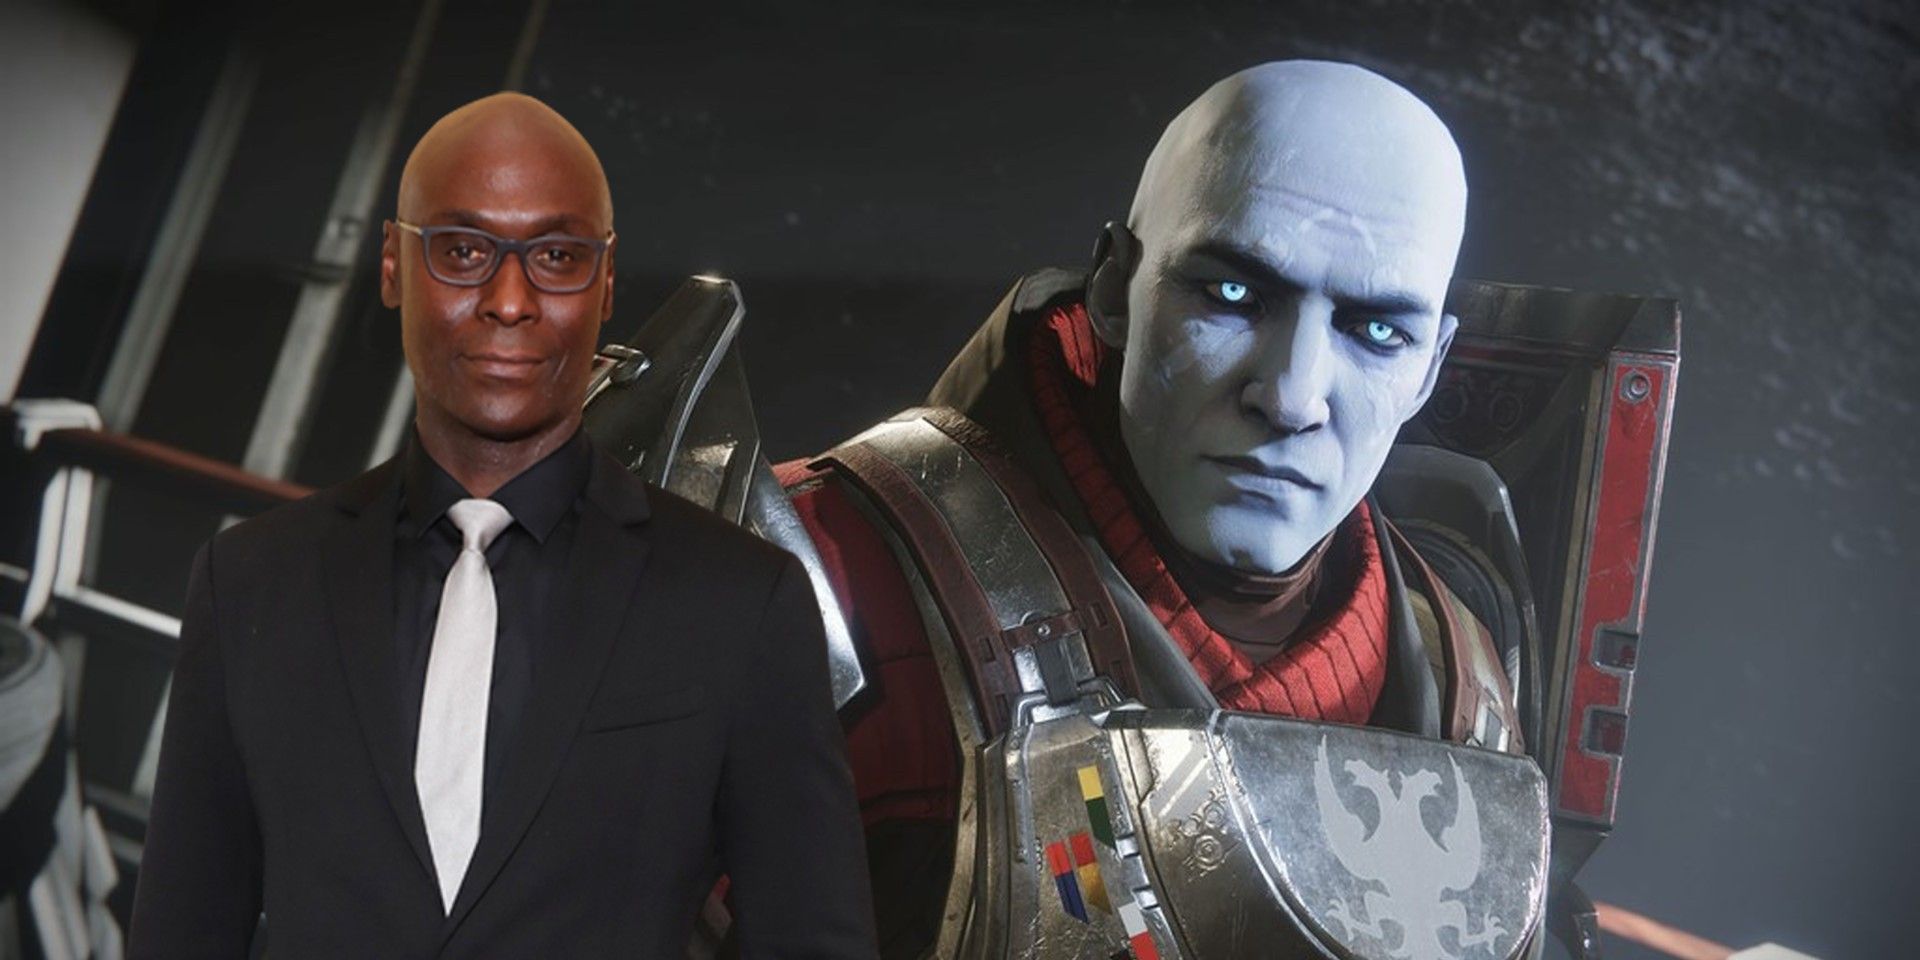 Lance Reddick in suit and glasses smiling at camera put on top of a destiny 2 Zavala image